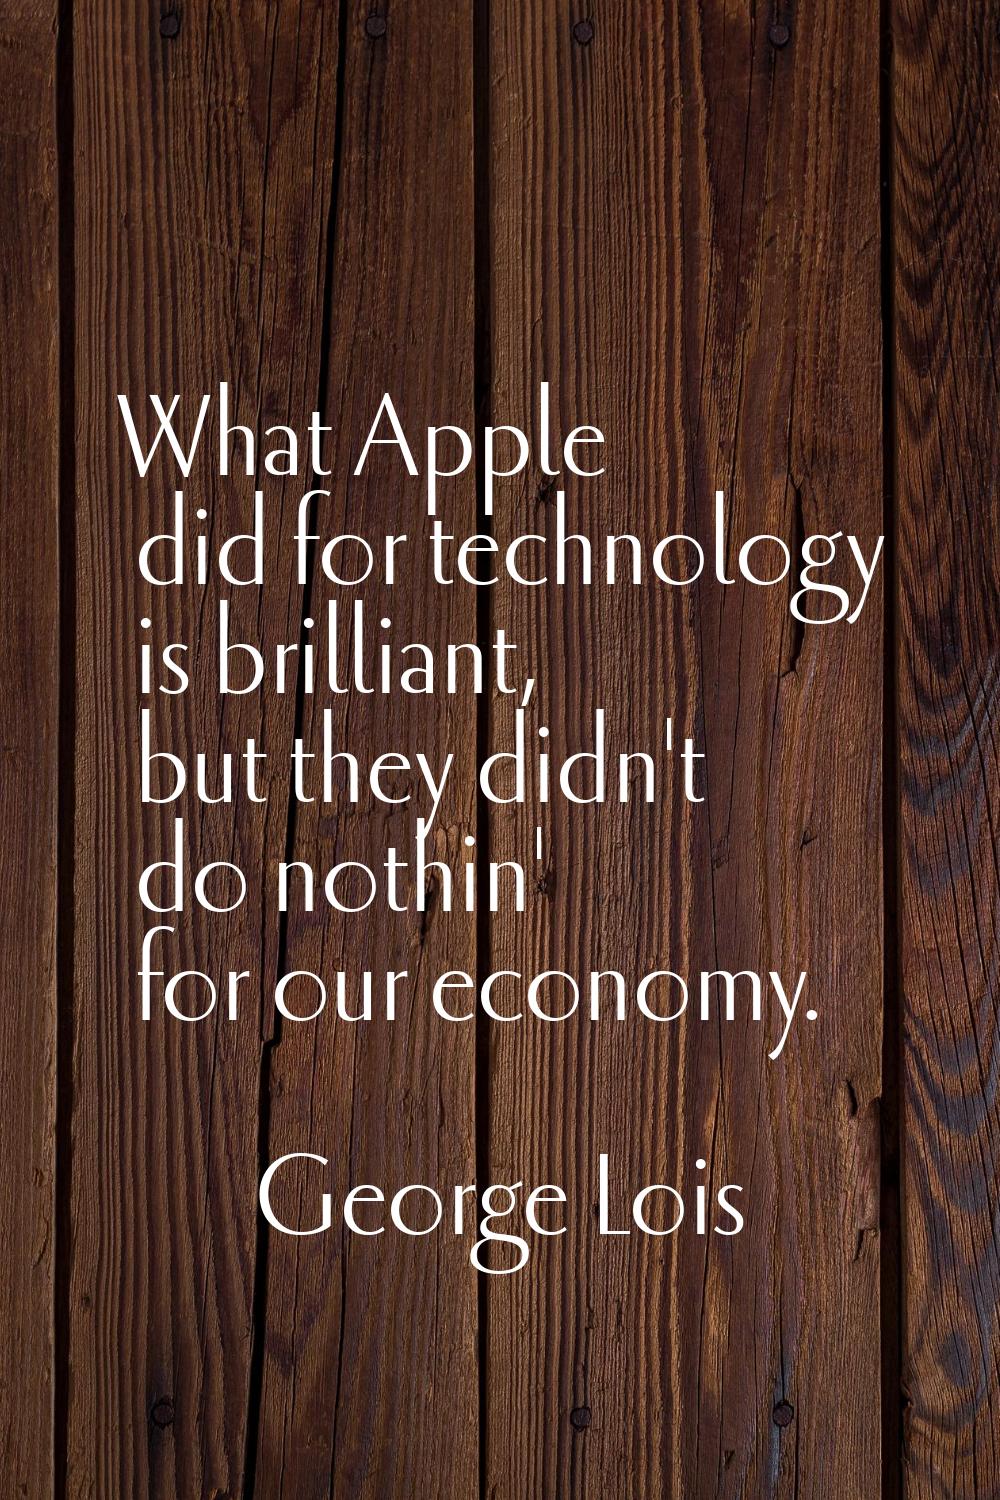 What Apple did for technology is brilliant, but they didn't do nothin' for our economy.